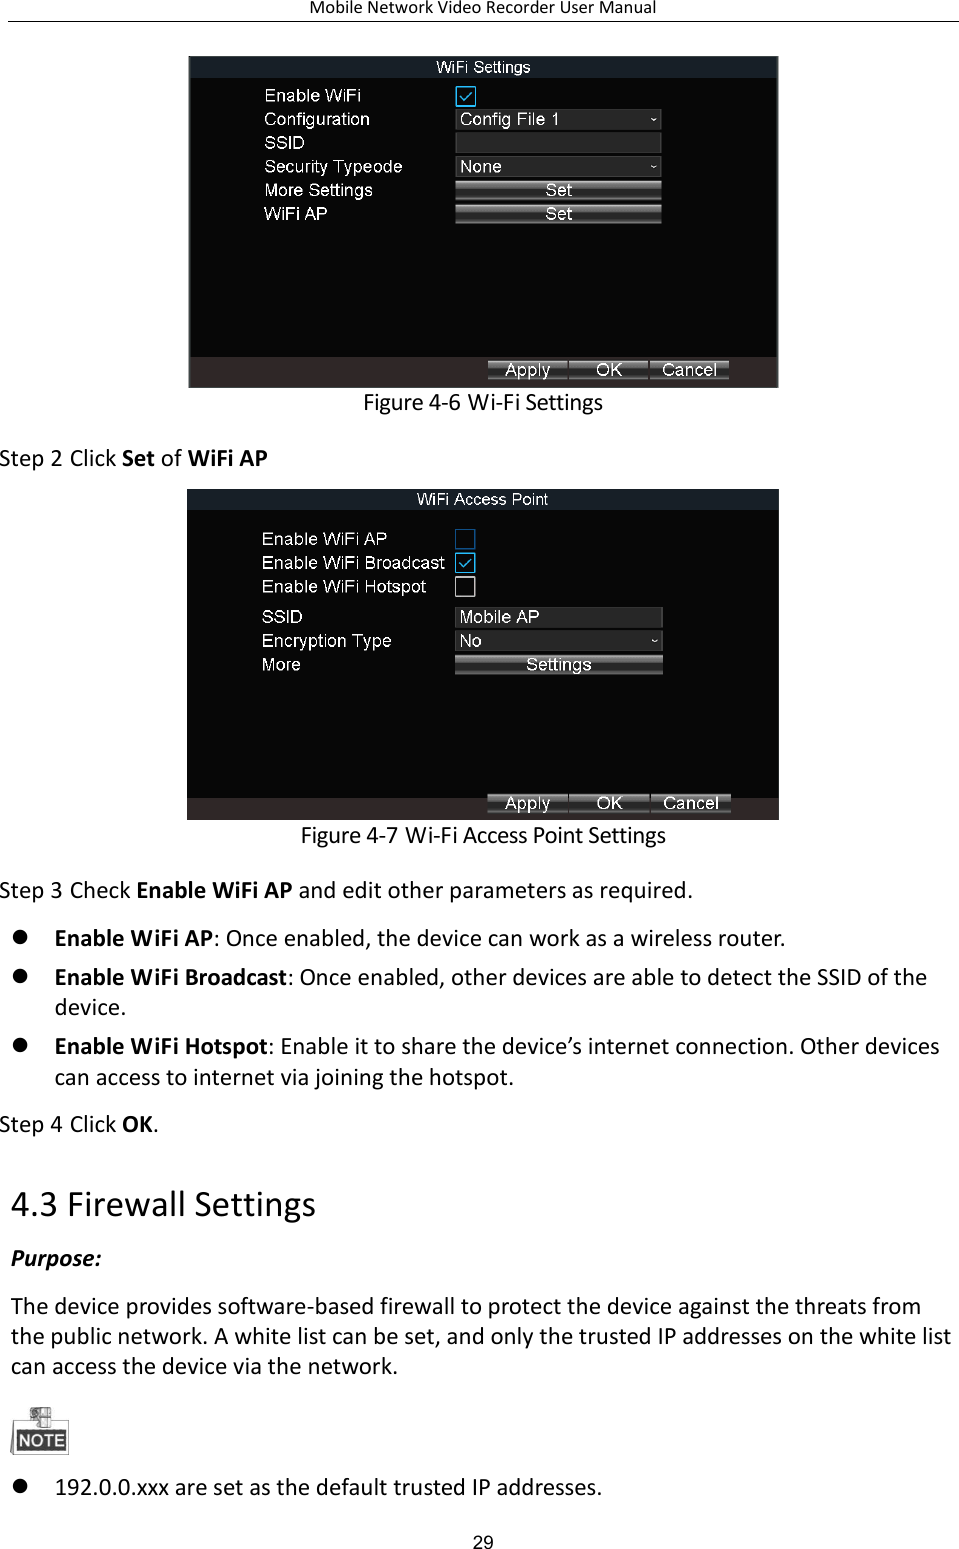 Mobile Network Video Recorder User Manual 29  Figure 4-6 Wi-Fi Settings Step 2 Click Set of WiFi AP  Figure 4-7 Wi-Fi Access Point Settings Step 3 Check Enable WiFi AP and edit other parameters as required.  Enable WiFi AP: Once enabled, the device can work as a wireless router.    Enable WiFi Broadcast: Once enabled, other devices are able to detect the SSID of the device.  Enable WiFi Hotspot: Enable it to share the device’s internet connection. Other devices can access to internet via joining the hotspot. Step 4 Click OK. 4.3 Firewall Settings Purpose: The device provides software-based firewall to protect the device against the threats from the public network. A white list can be set, and only the trusted IP addresses on the white list can access the device via the network.   192.0.0.xxx are set as the default trusted IP addresses. 